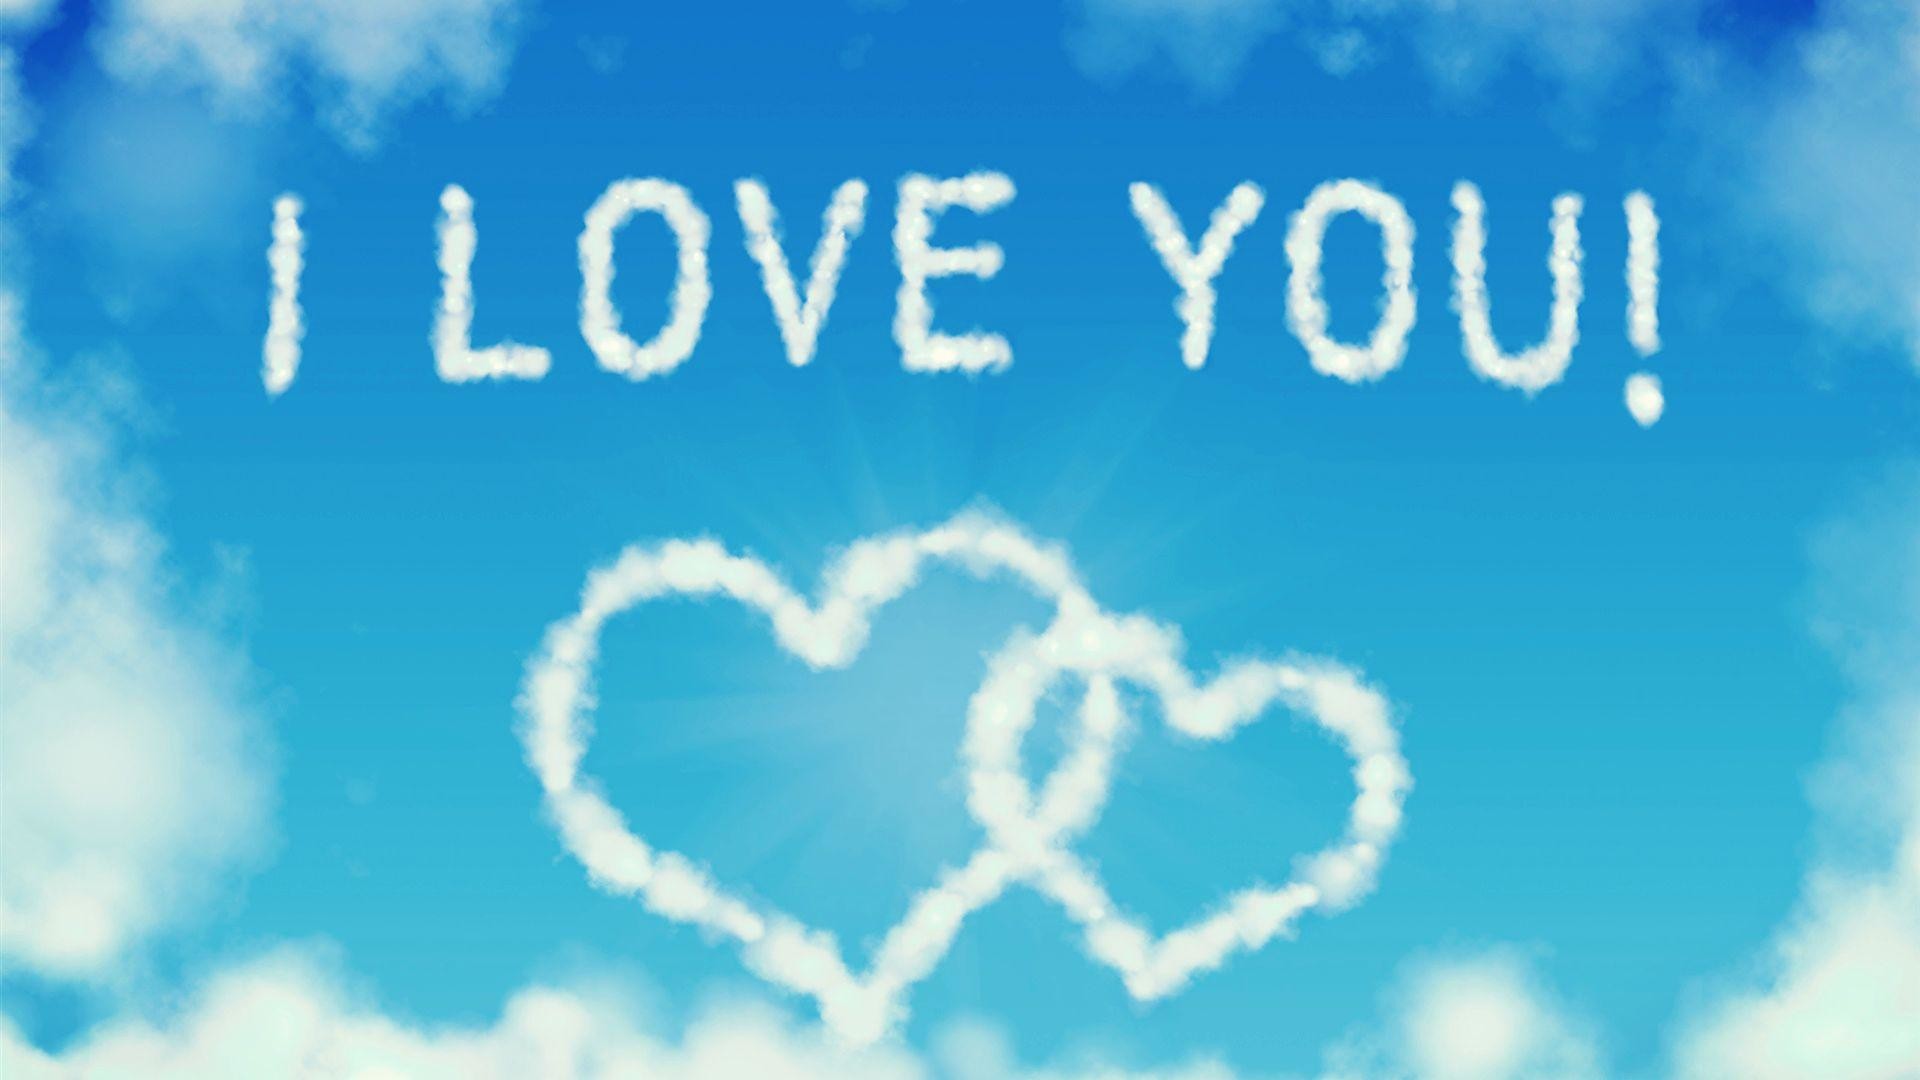 I Love You Wallpapers Wallpaper Cave 1920x1080